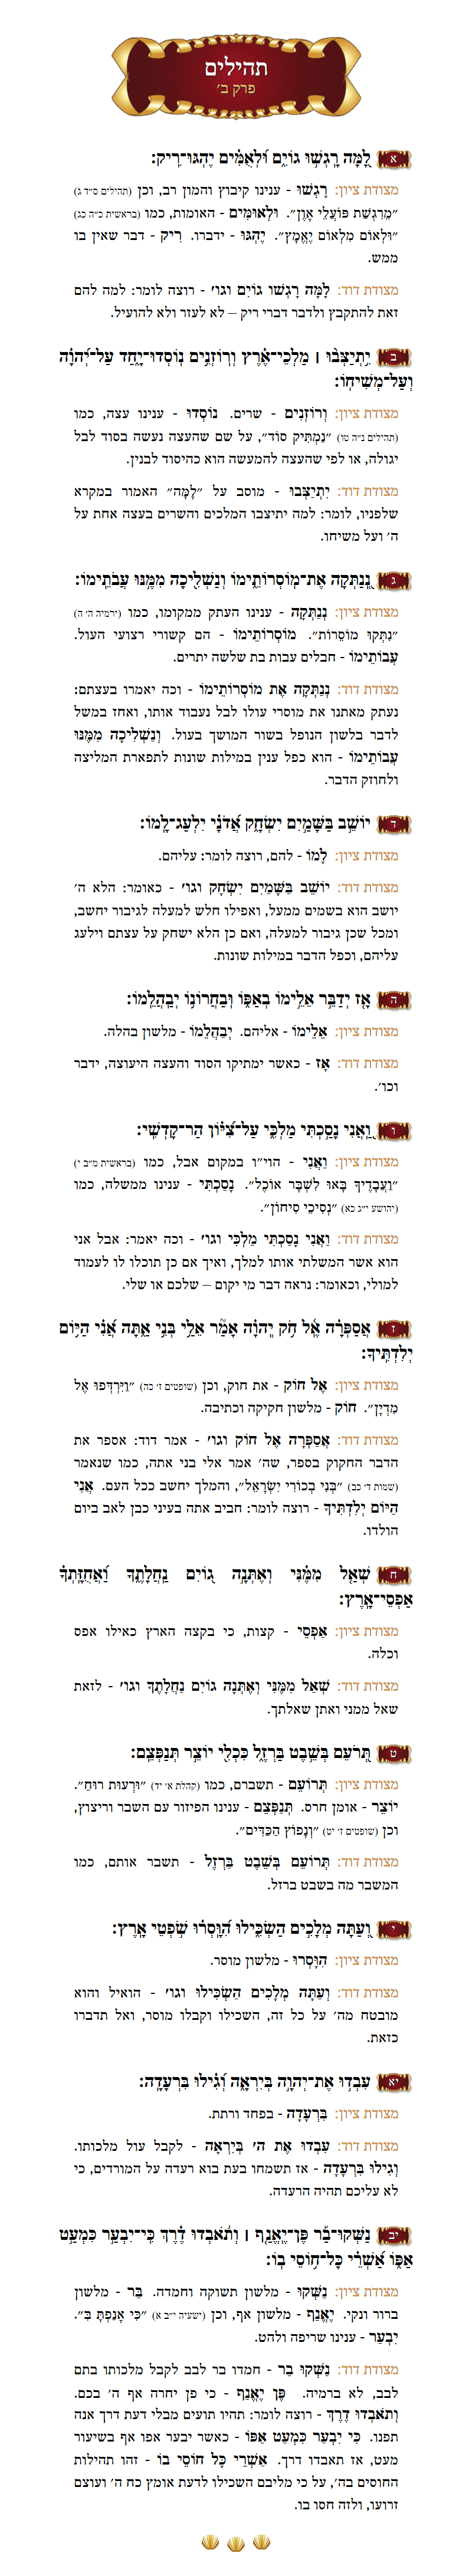 Sefer Tehillim Chapter 2 with commentary